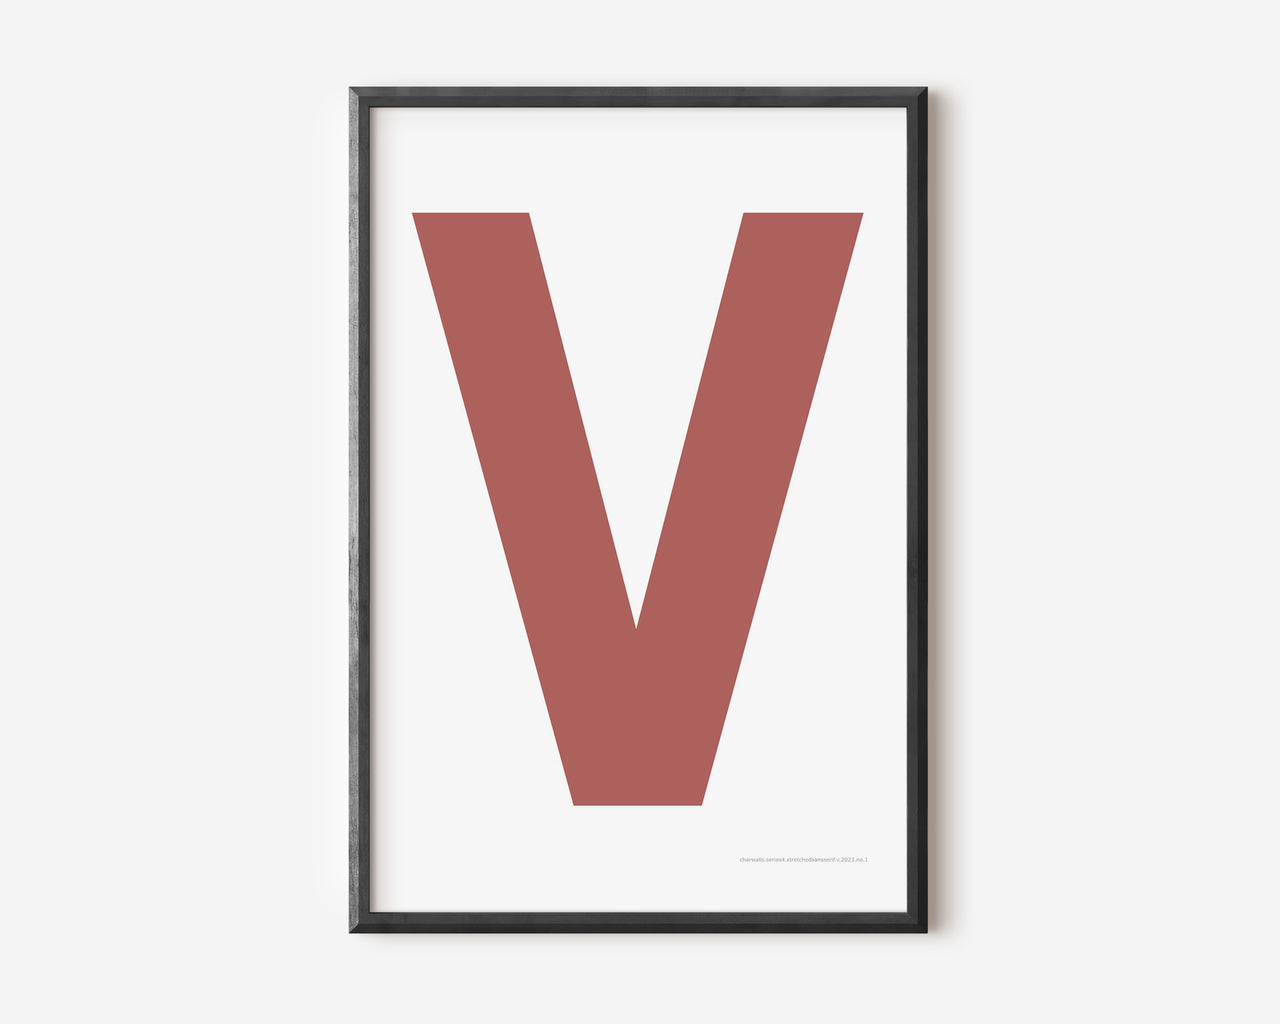 Modern art print with an uppercase Nantucket red letter V on a white background.